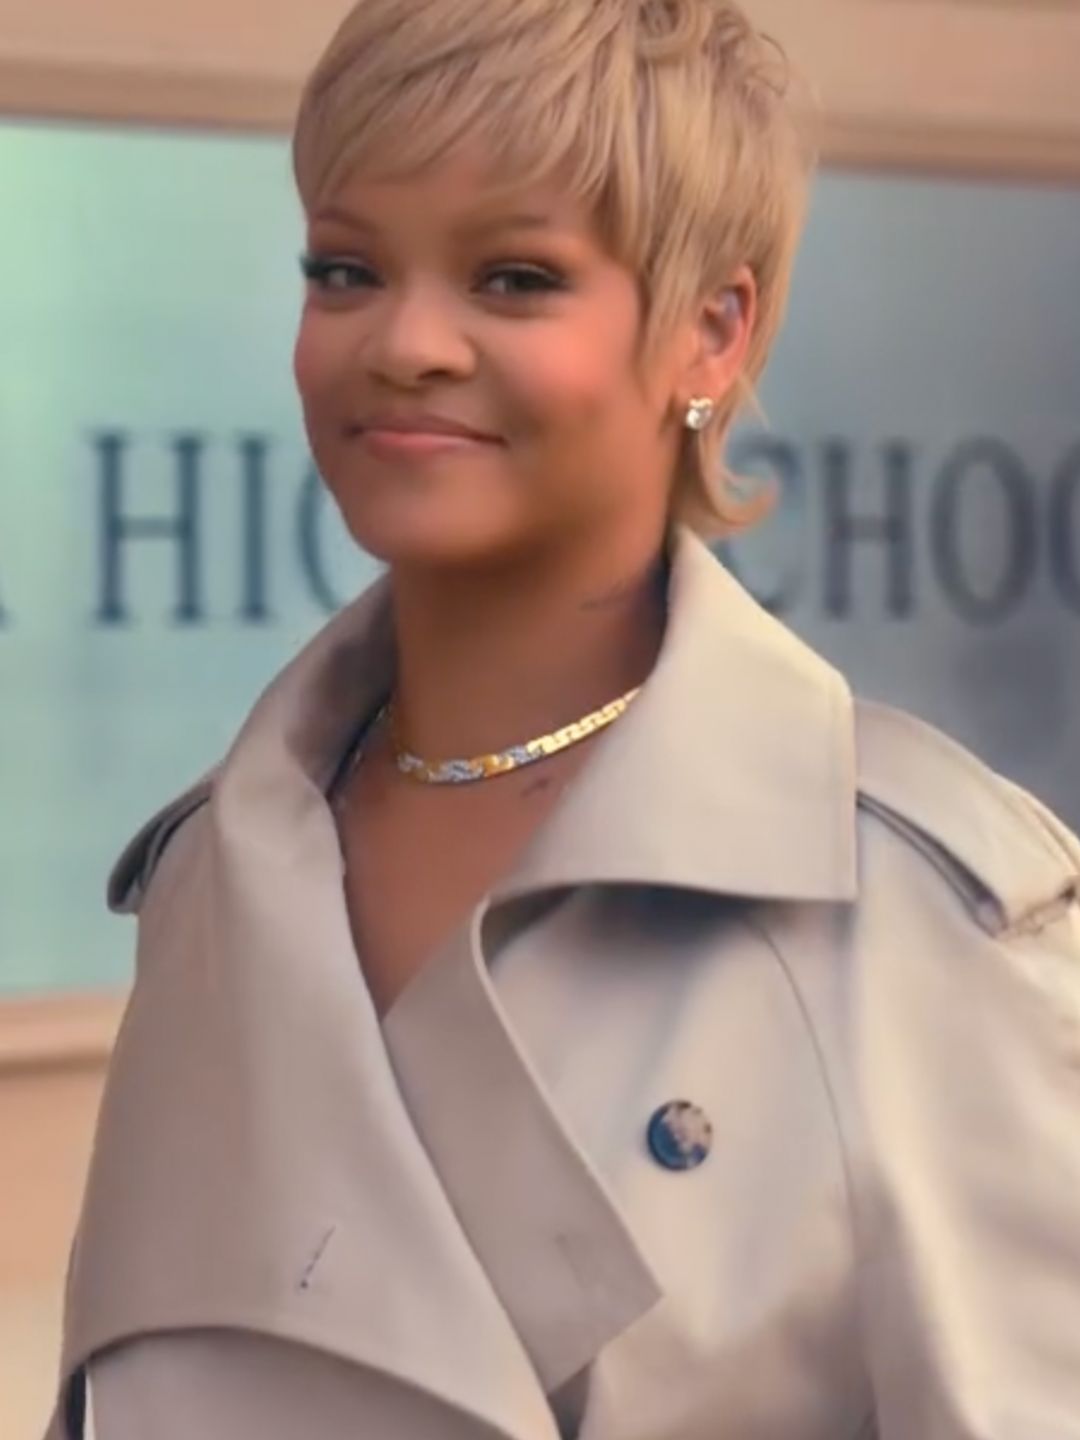 Rihanna showed off the hairstyle in a trailer for her Fenty Hair product line